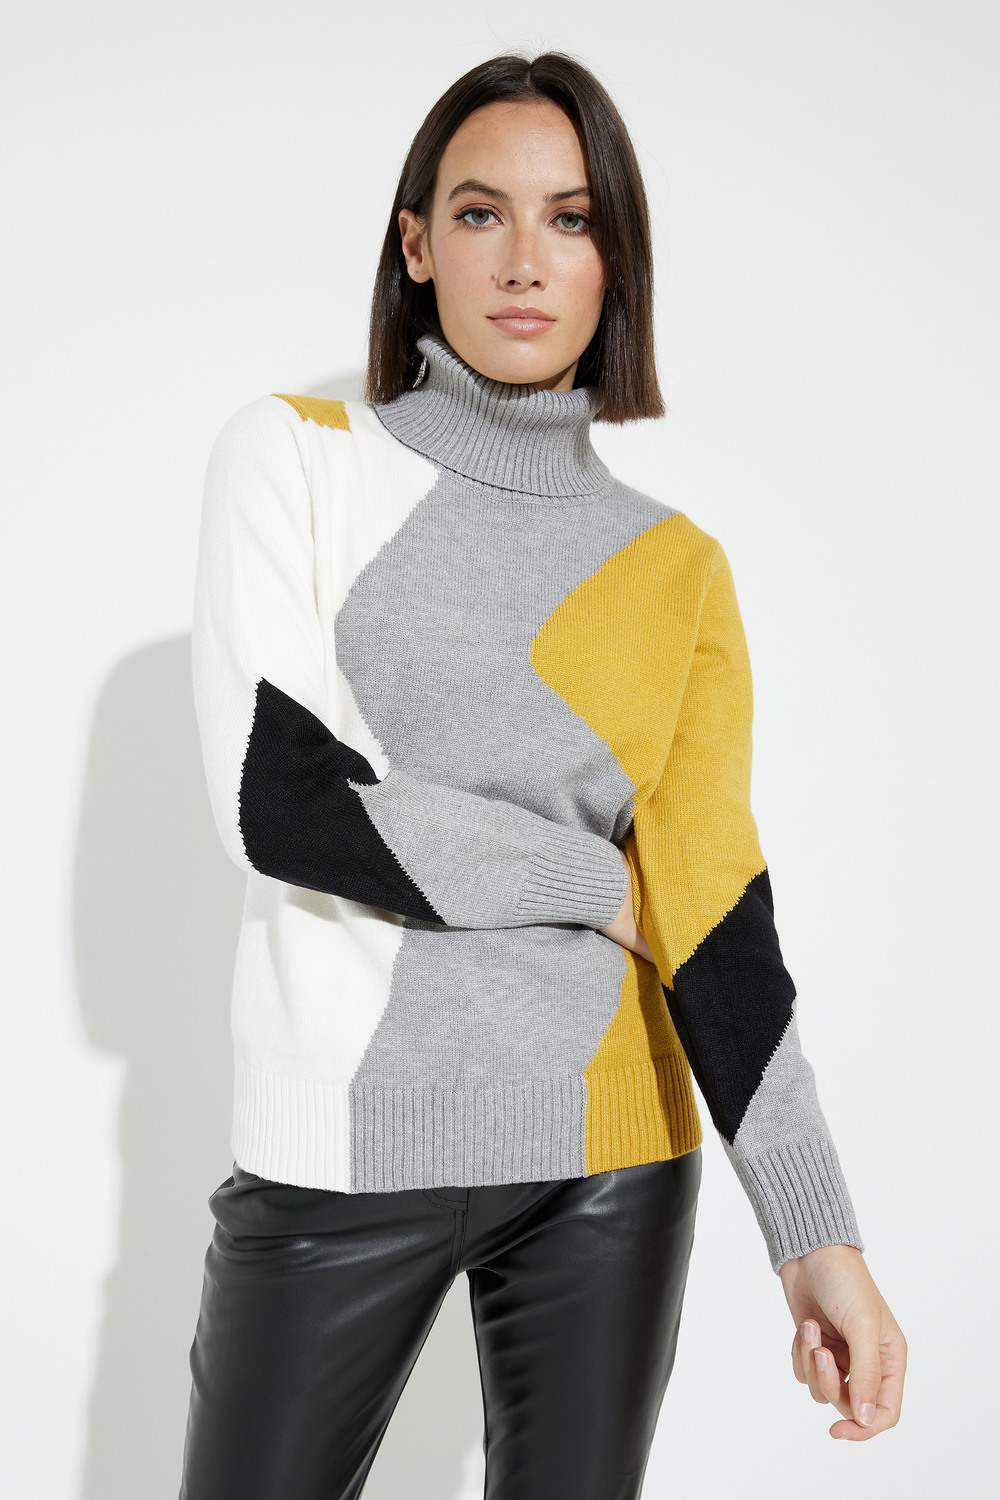 Colour-Blocked Sweater Style A40115. Multi